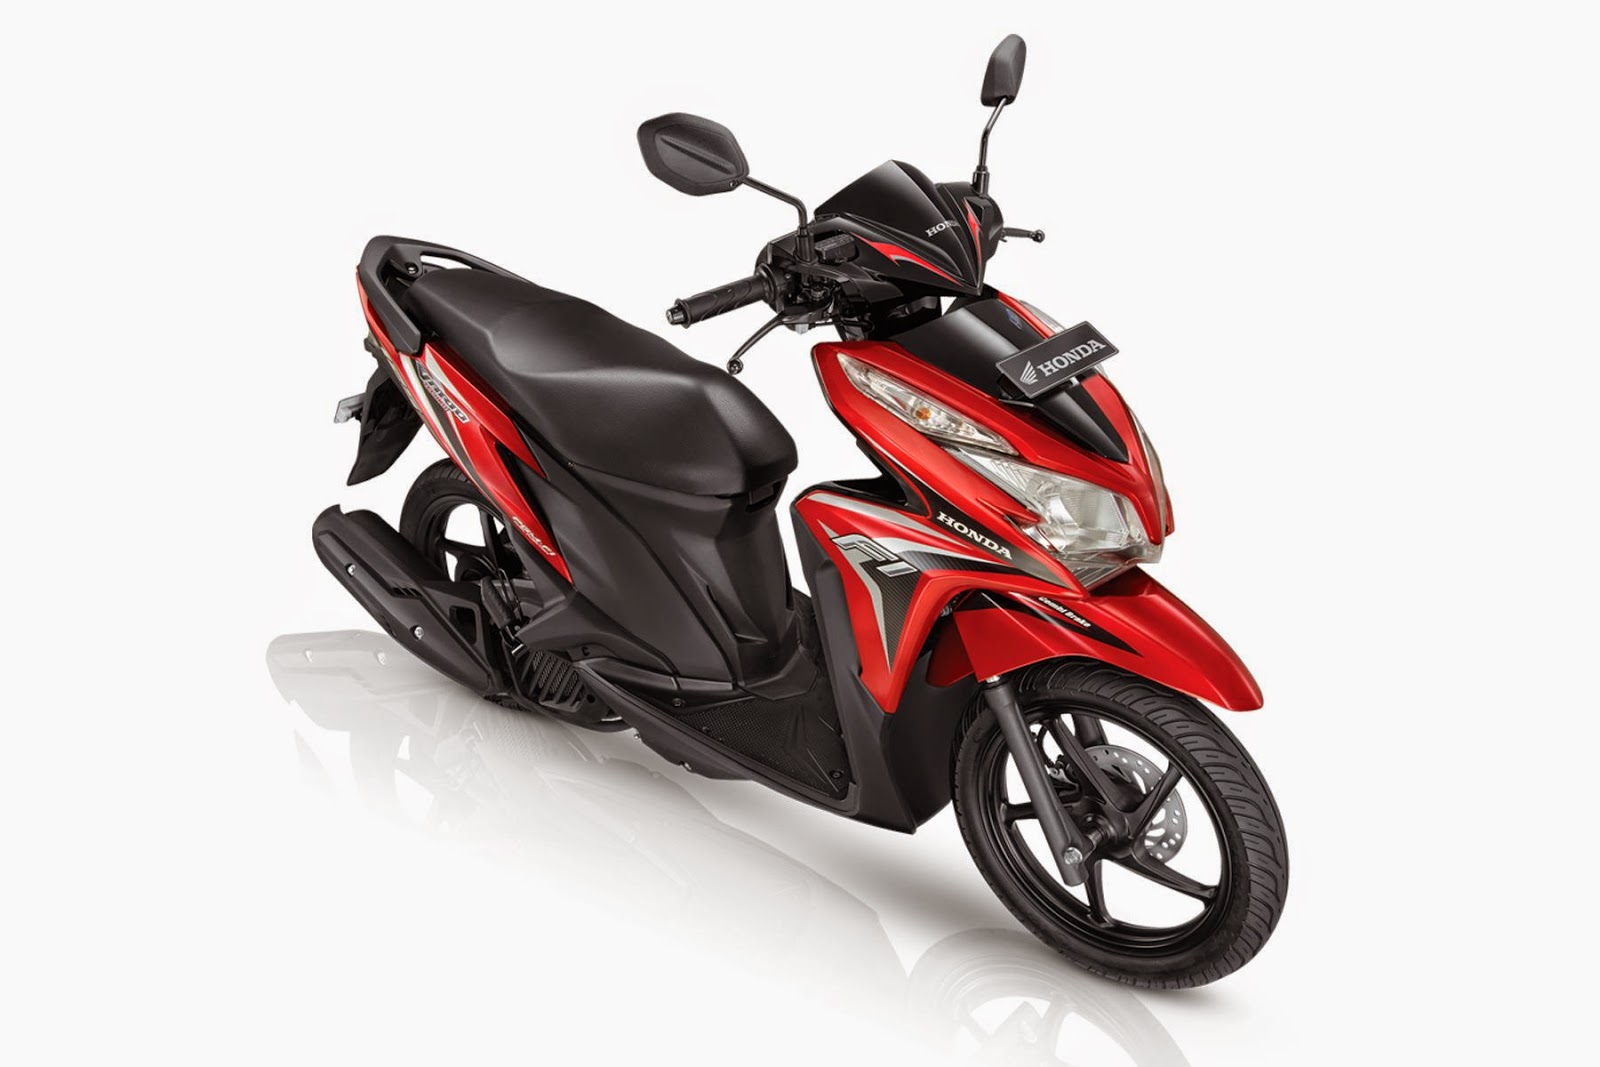 Honda Vario Techno 125 Vario Techno 125 Honda Vario Techno 125 Iss .